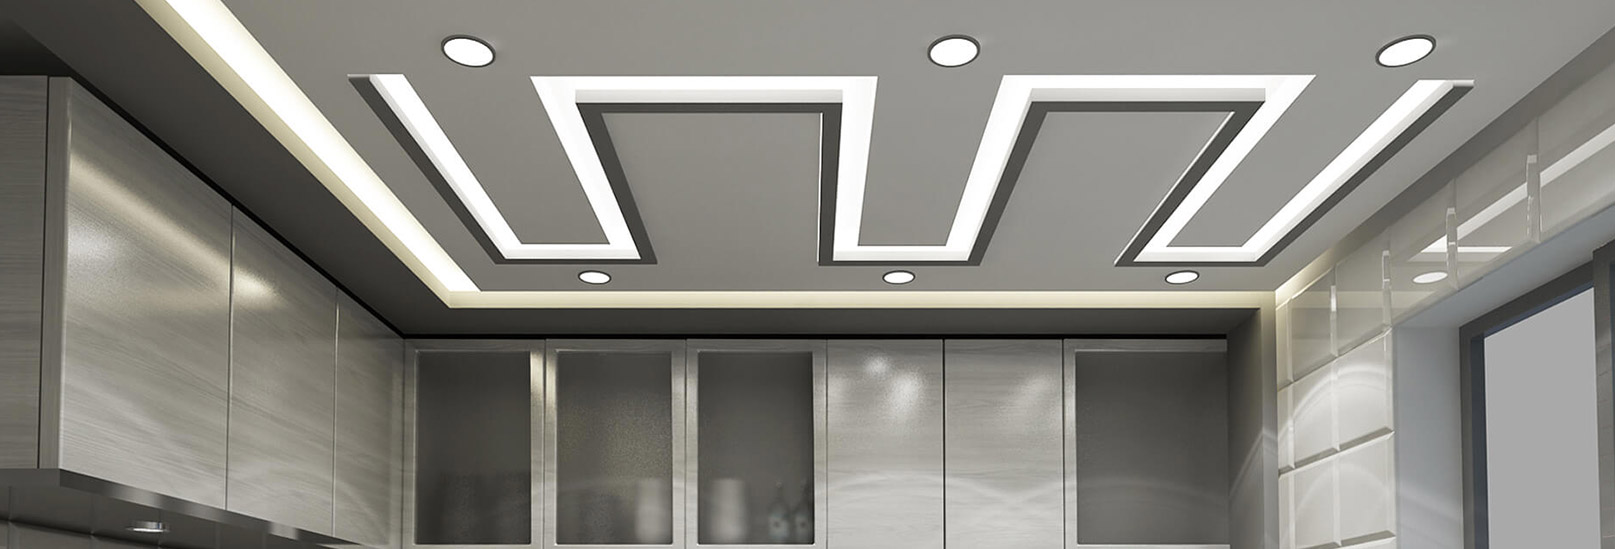 tSimple and Best False Ceiling Designs for Living Room